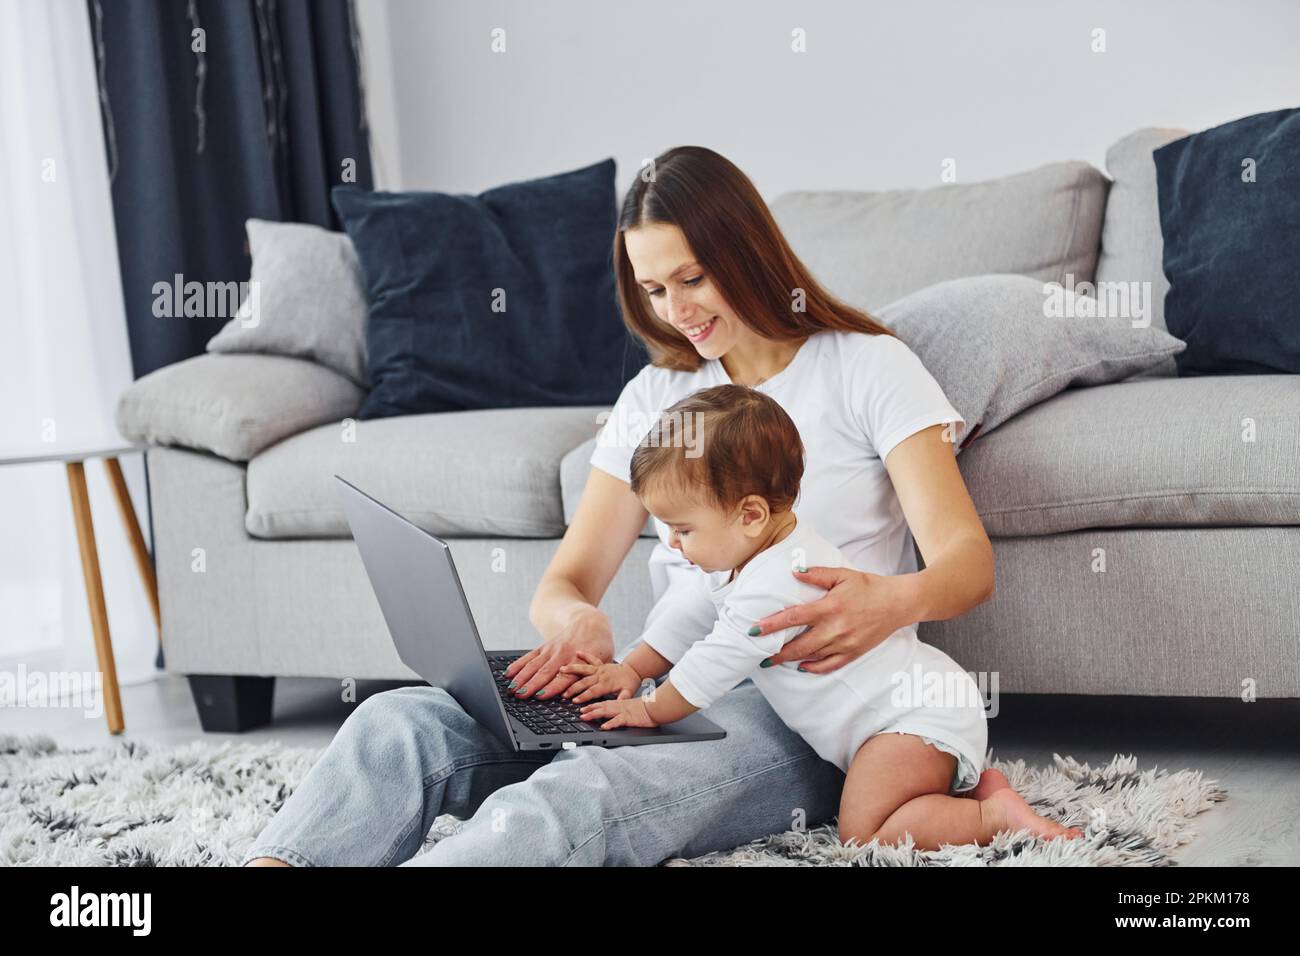 Watching at the laptop. Mother with her little daughter is indoors at home together. Stock Photo